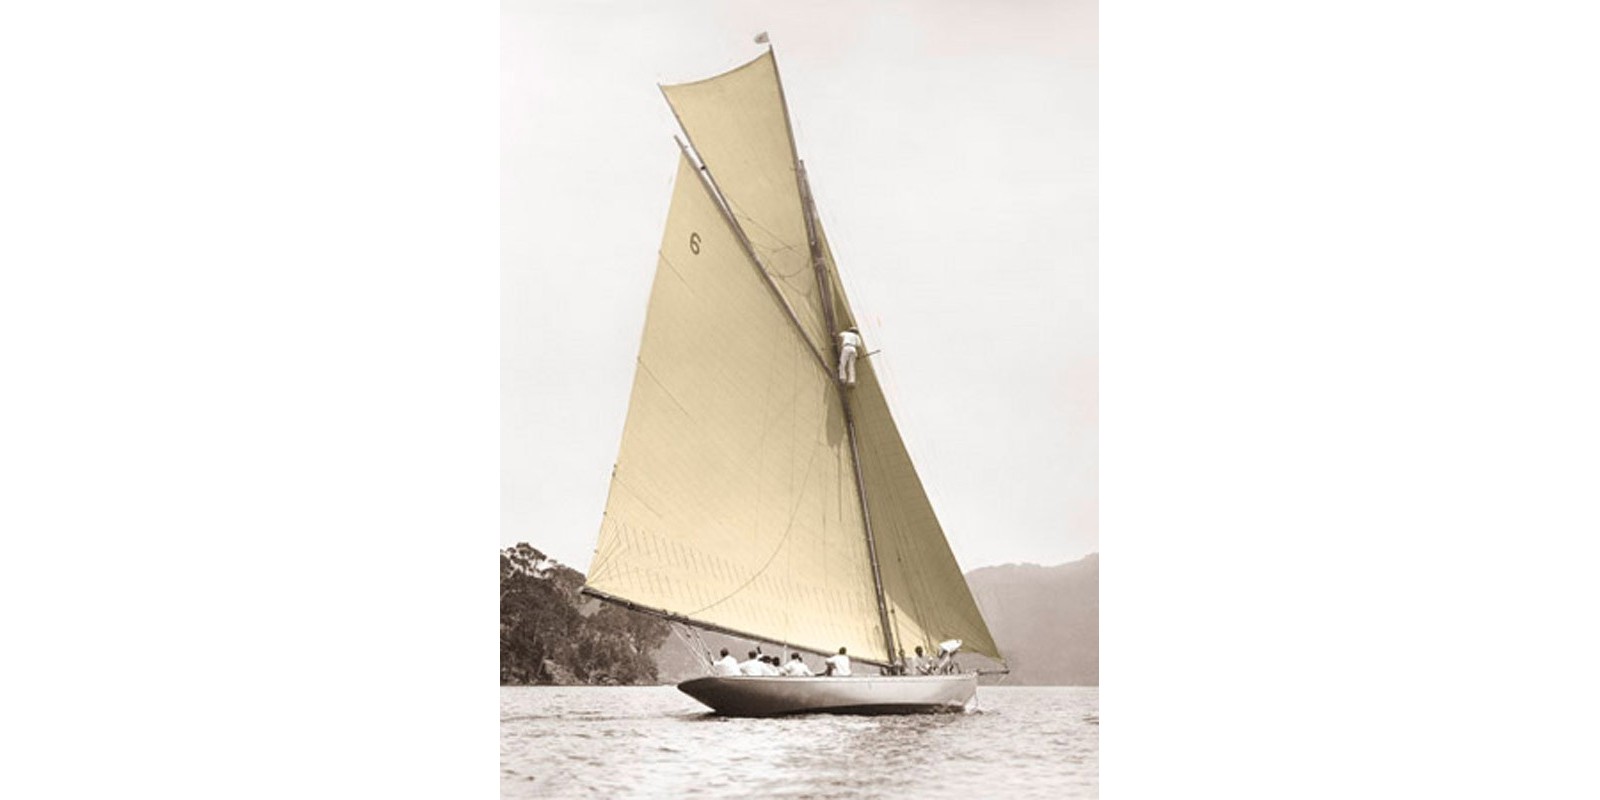 Anonymous - Vintage yacht